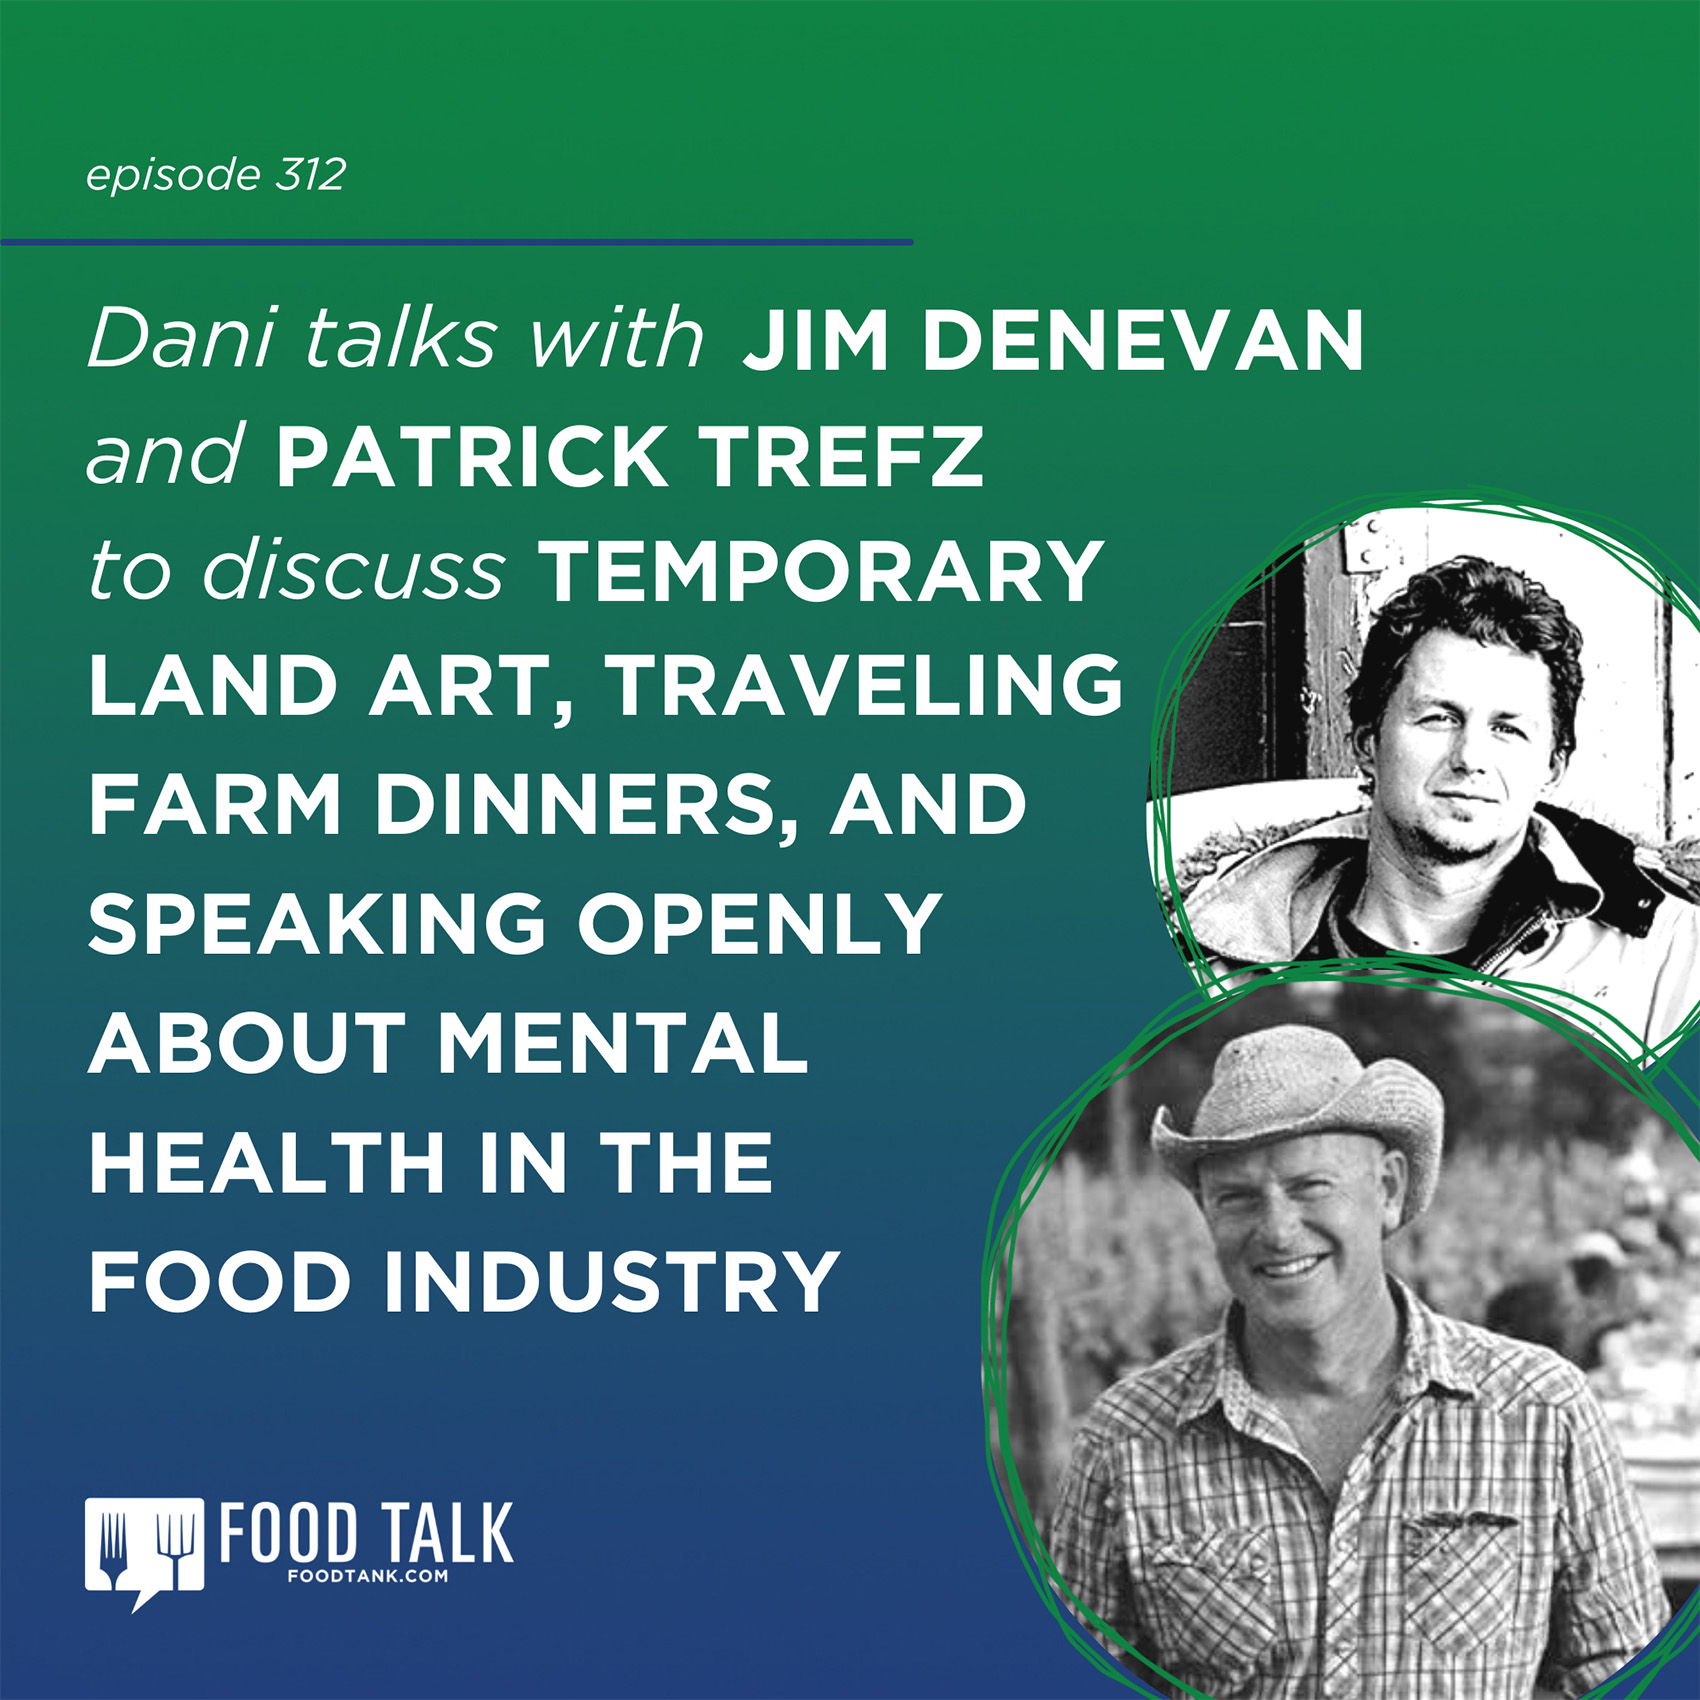 https://podcasts.apple.com/us/podcast/312-man-in-the-field-with-jim-denevan-and-patrick/id1434128568?i=1000554950592